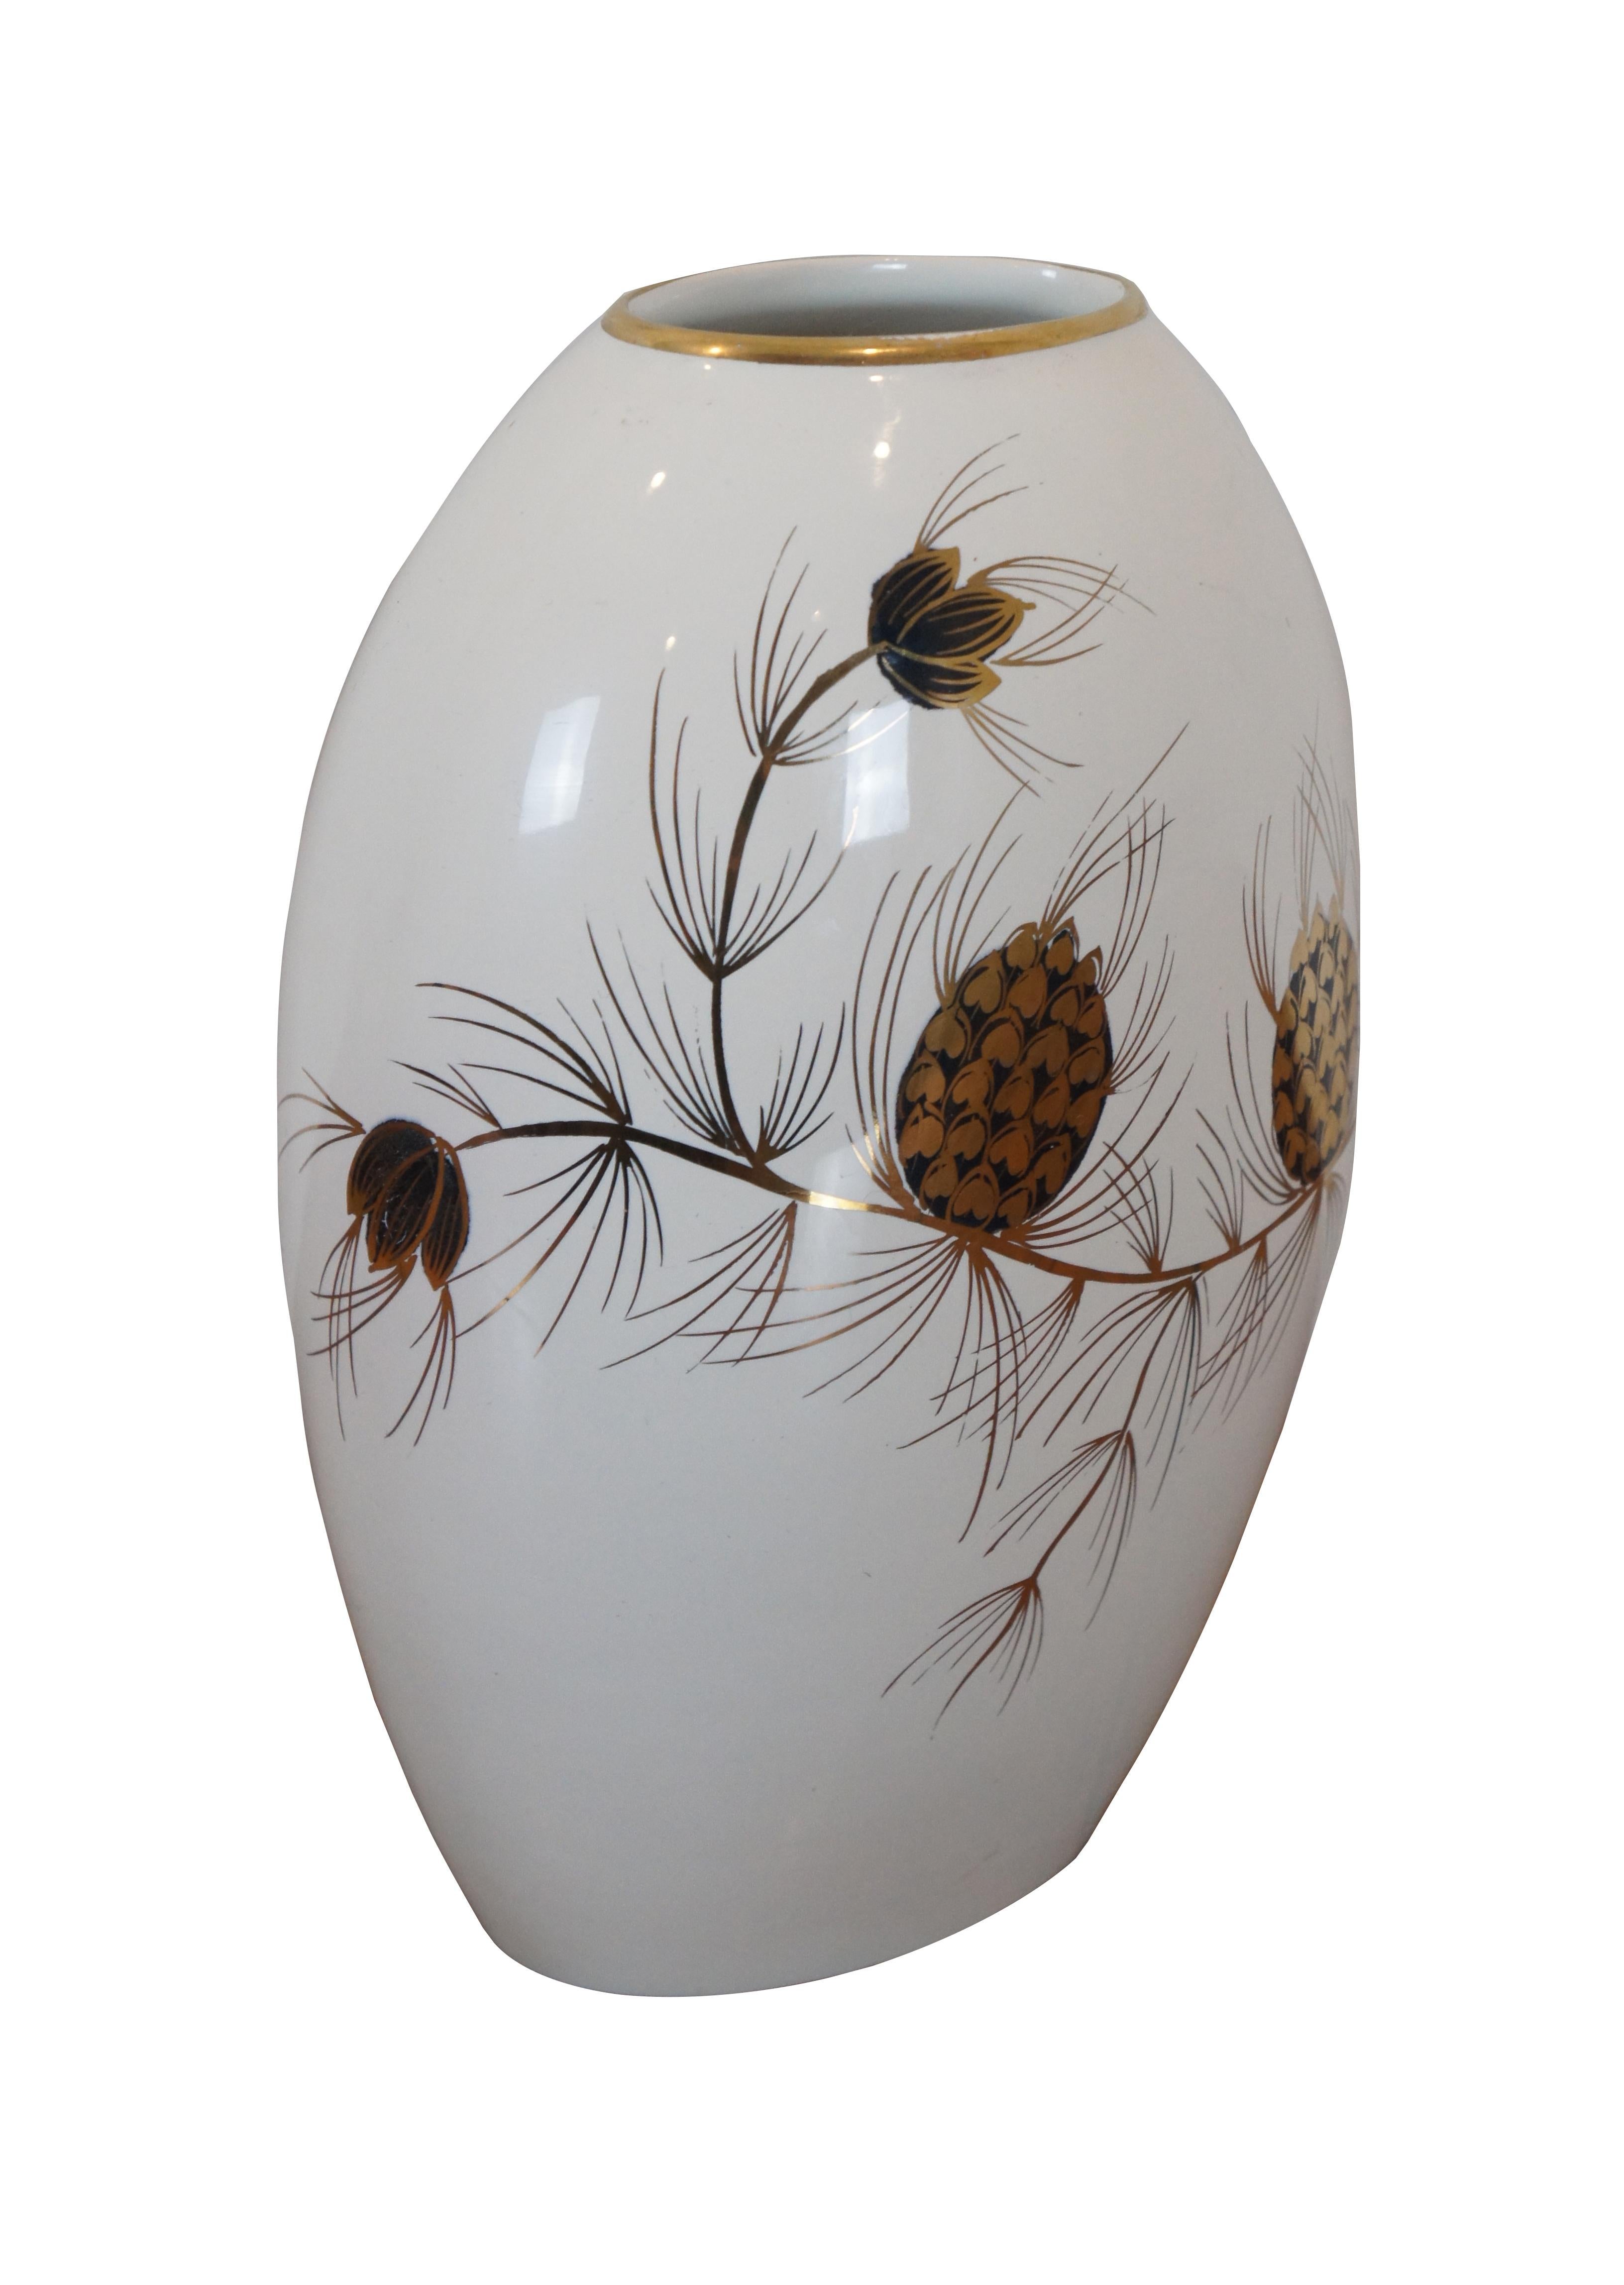 Vintage oval shaped, white porcelain vase decorated with a gilded and cobalt blue design of pine branches studded with cones. Marked on base: 921 – Dec: Denna – Flora Gouda Holland – Hand Painted.

Flora Holland - Gouda porcelain factory circa 1945